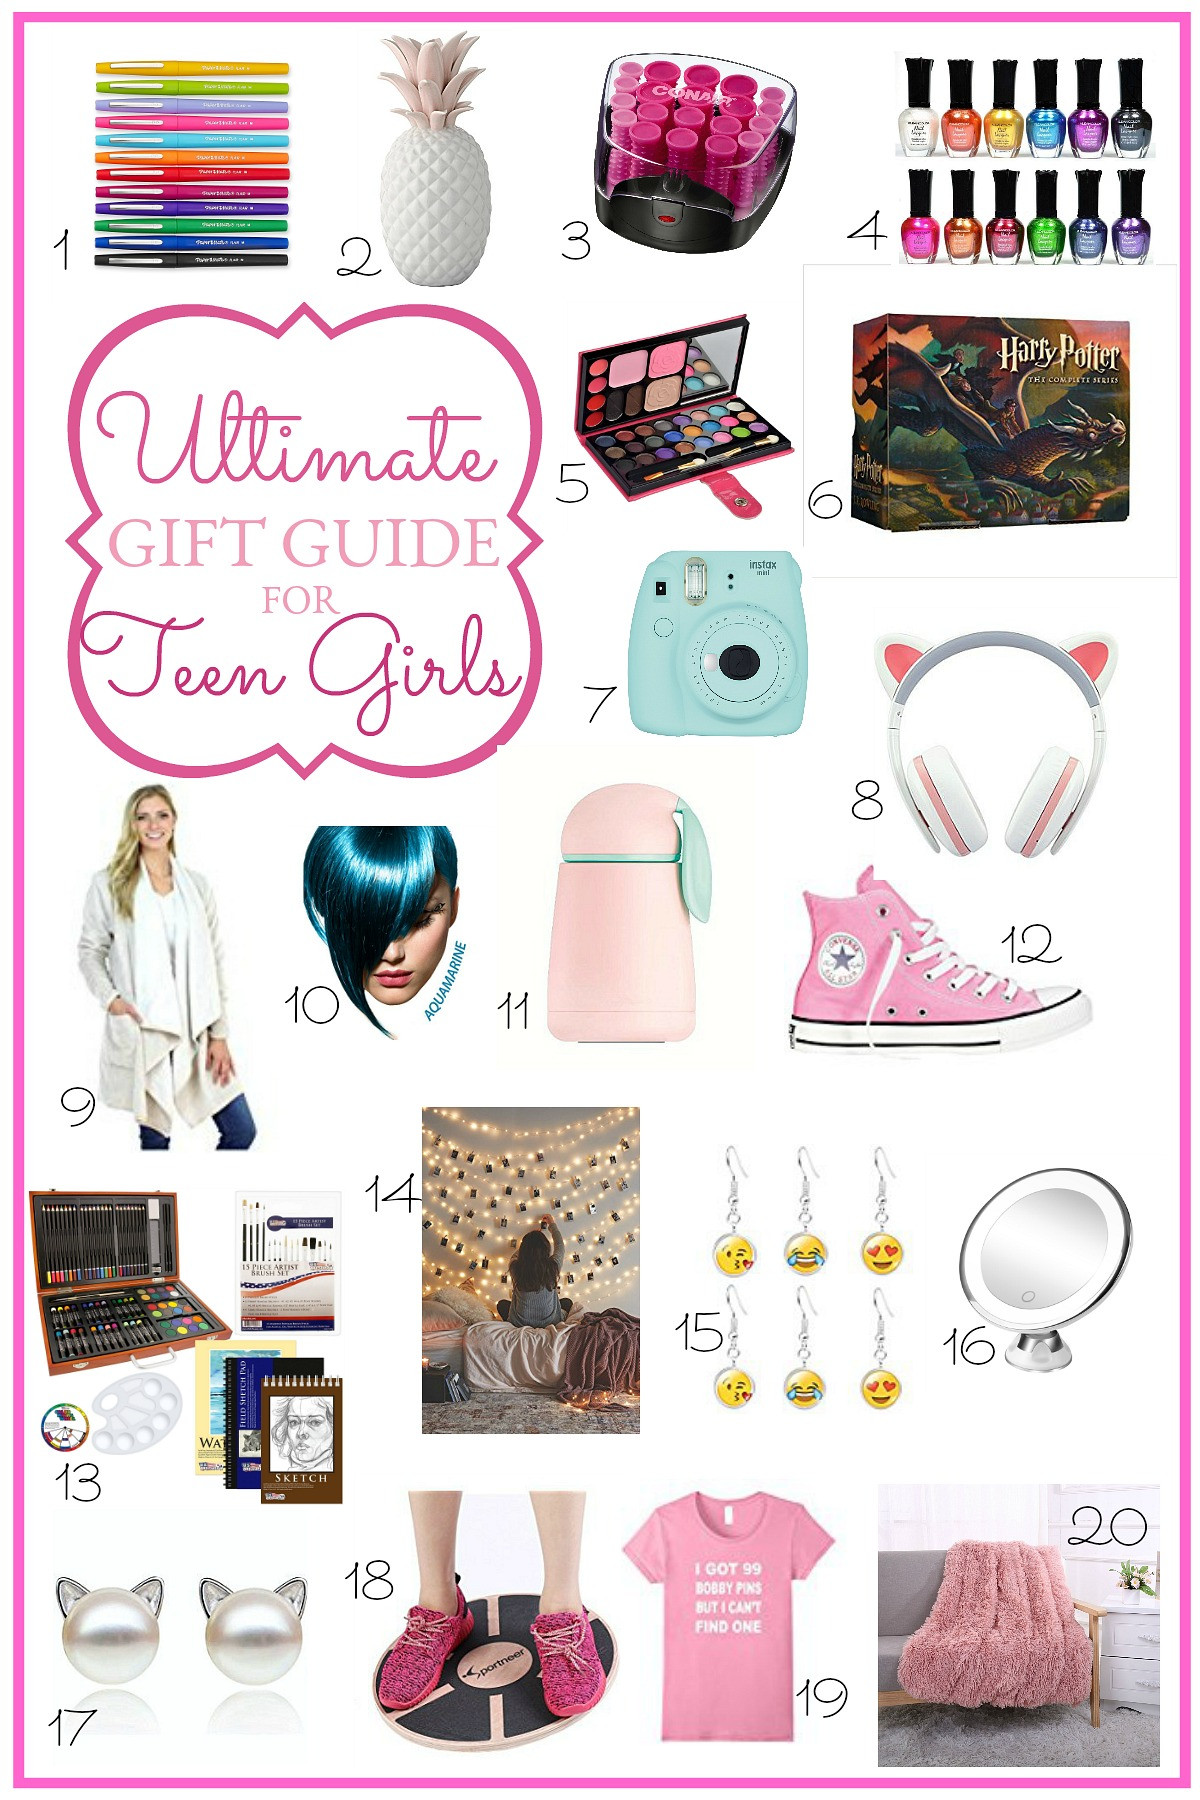 Good Gift Ideas For Girls
 Ultimate Holiday Gift Guide for Teen Girls